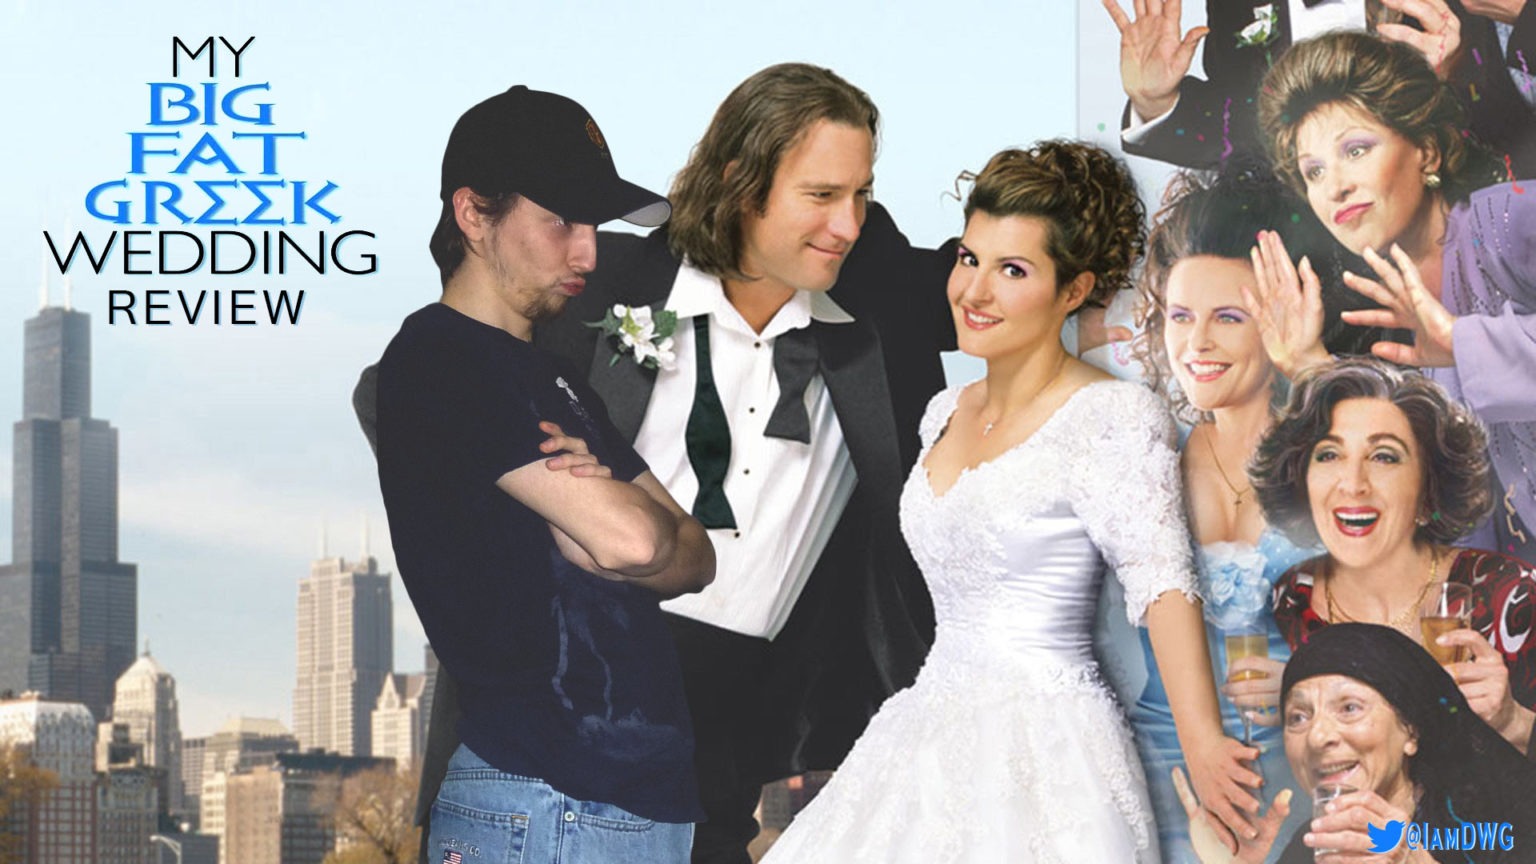 My Big Fat Greek Wedding Movie Review The World of Movies